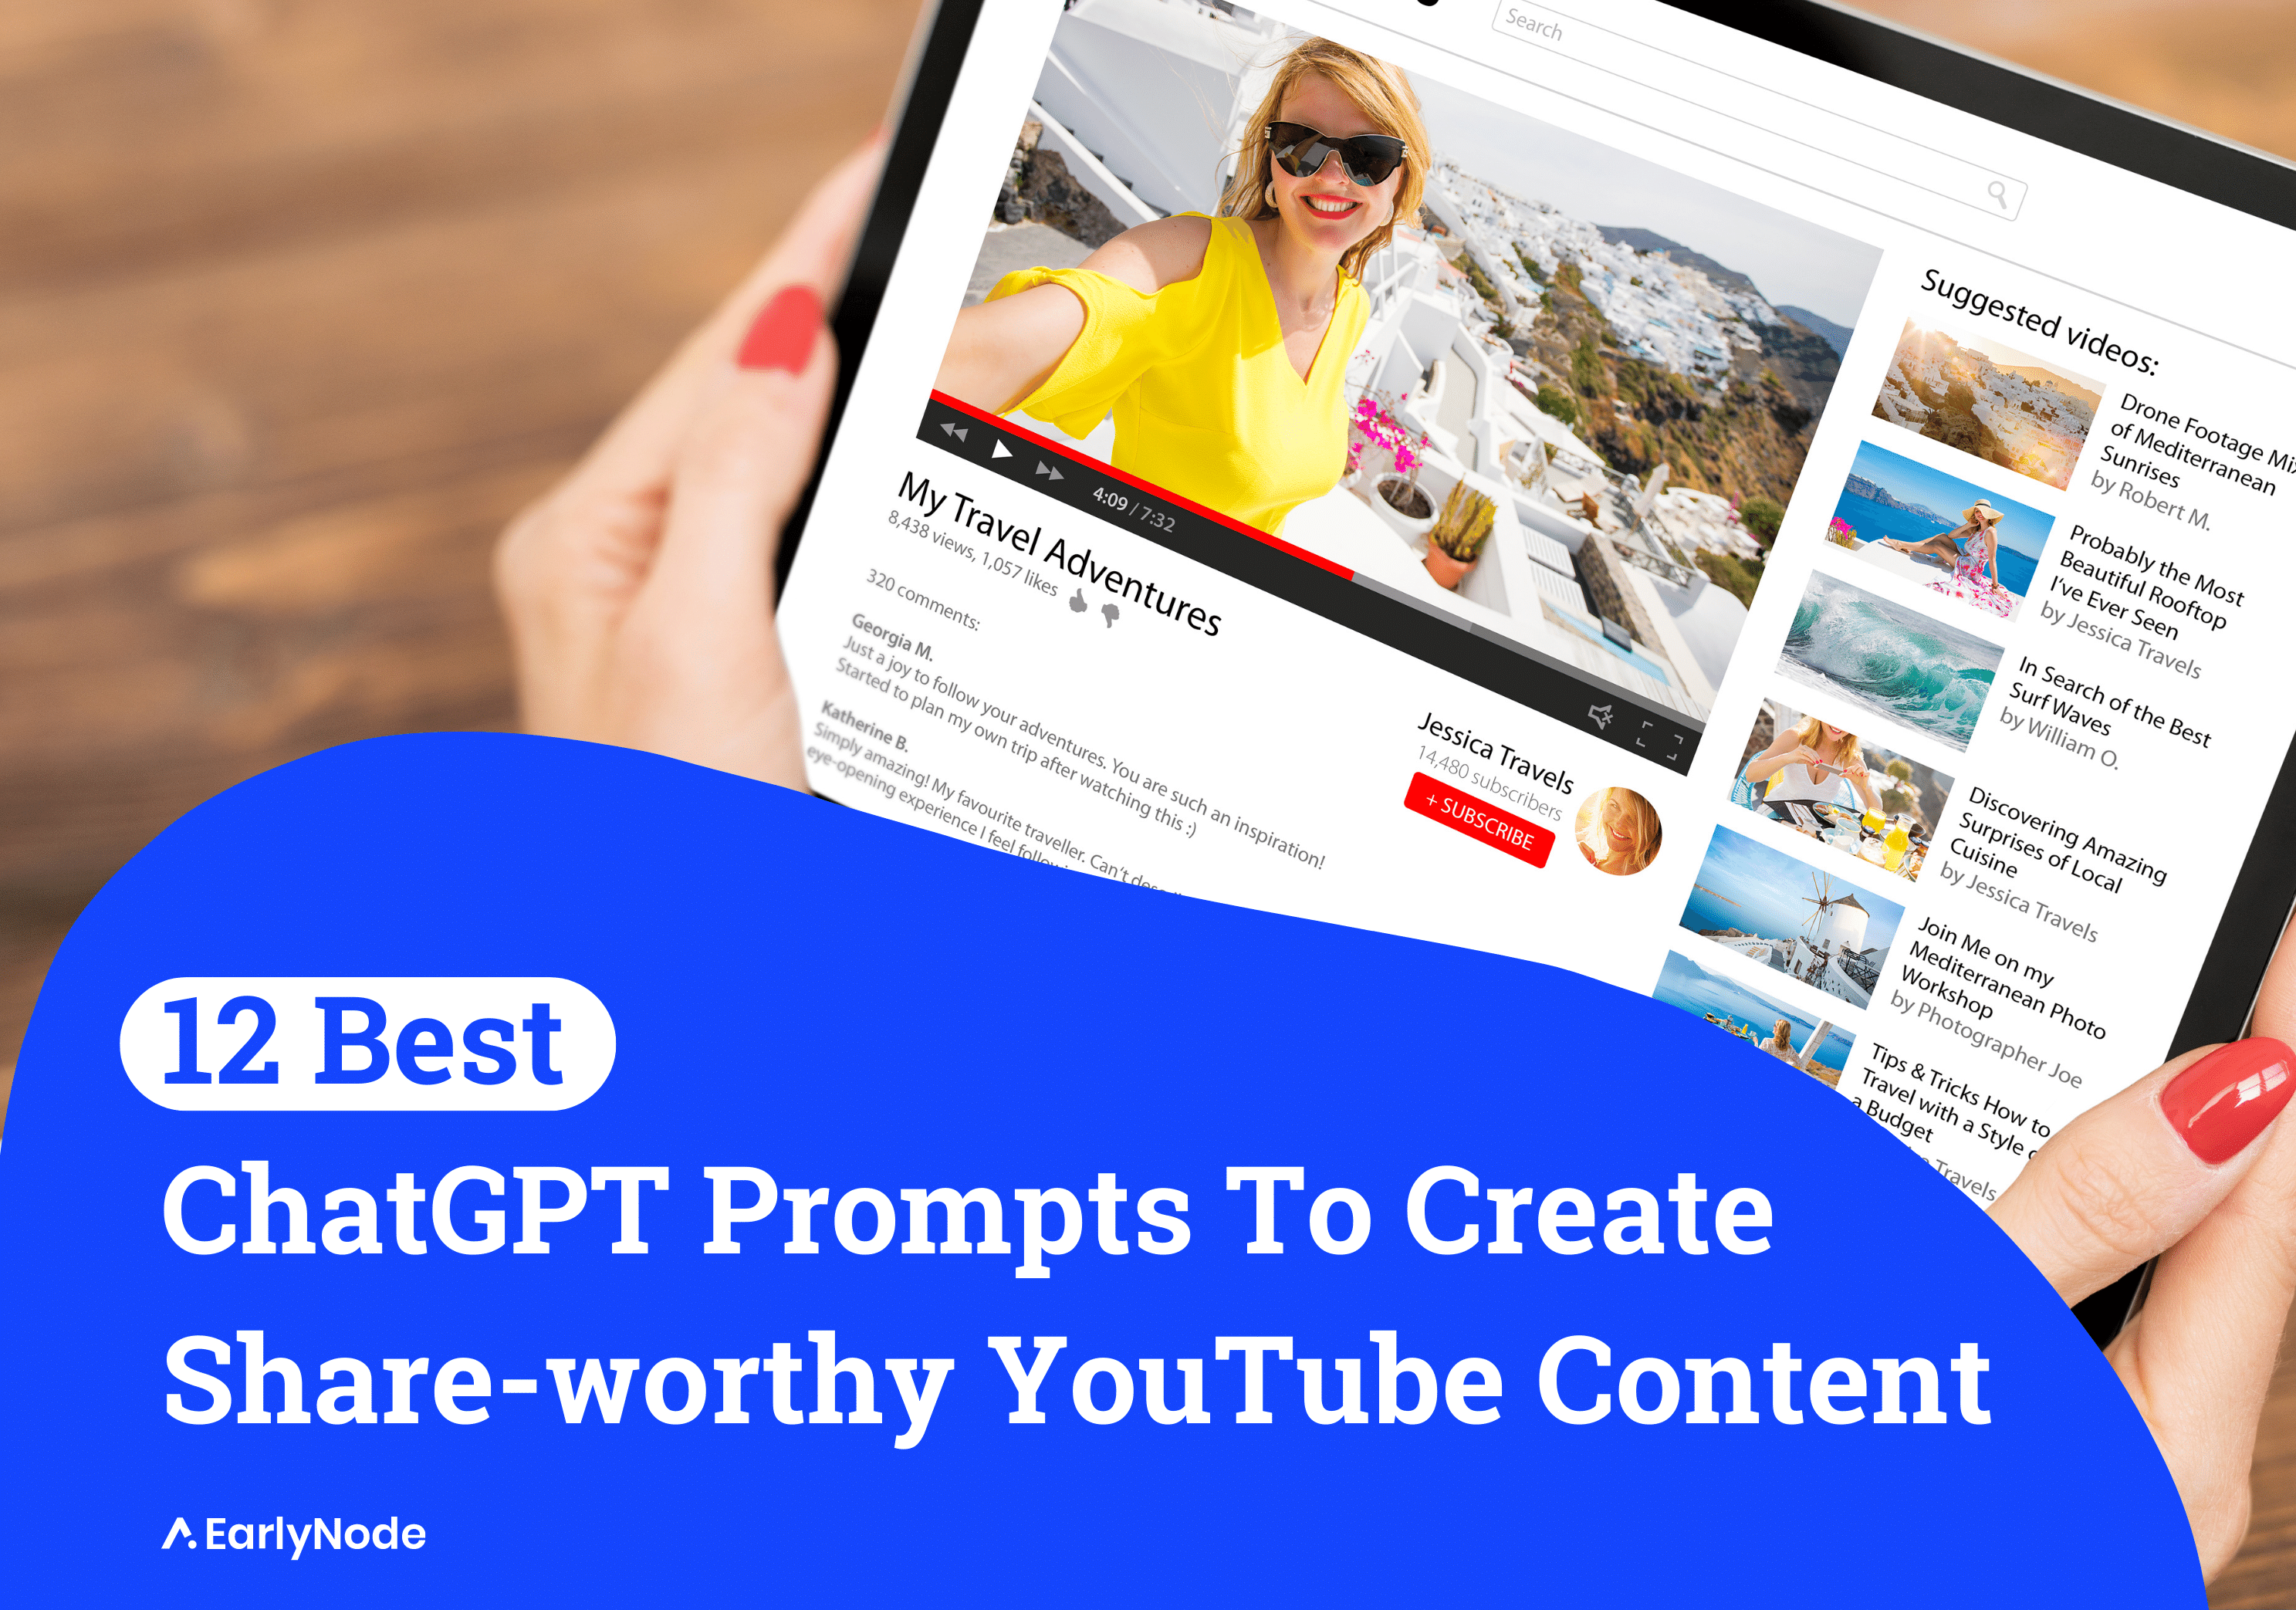 12 ChatGPT Prompts To Create Share-worthy YouTube Content